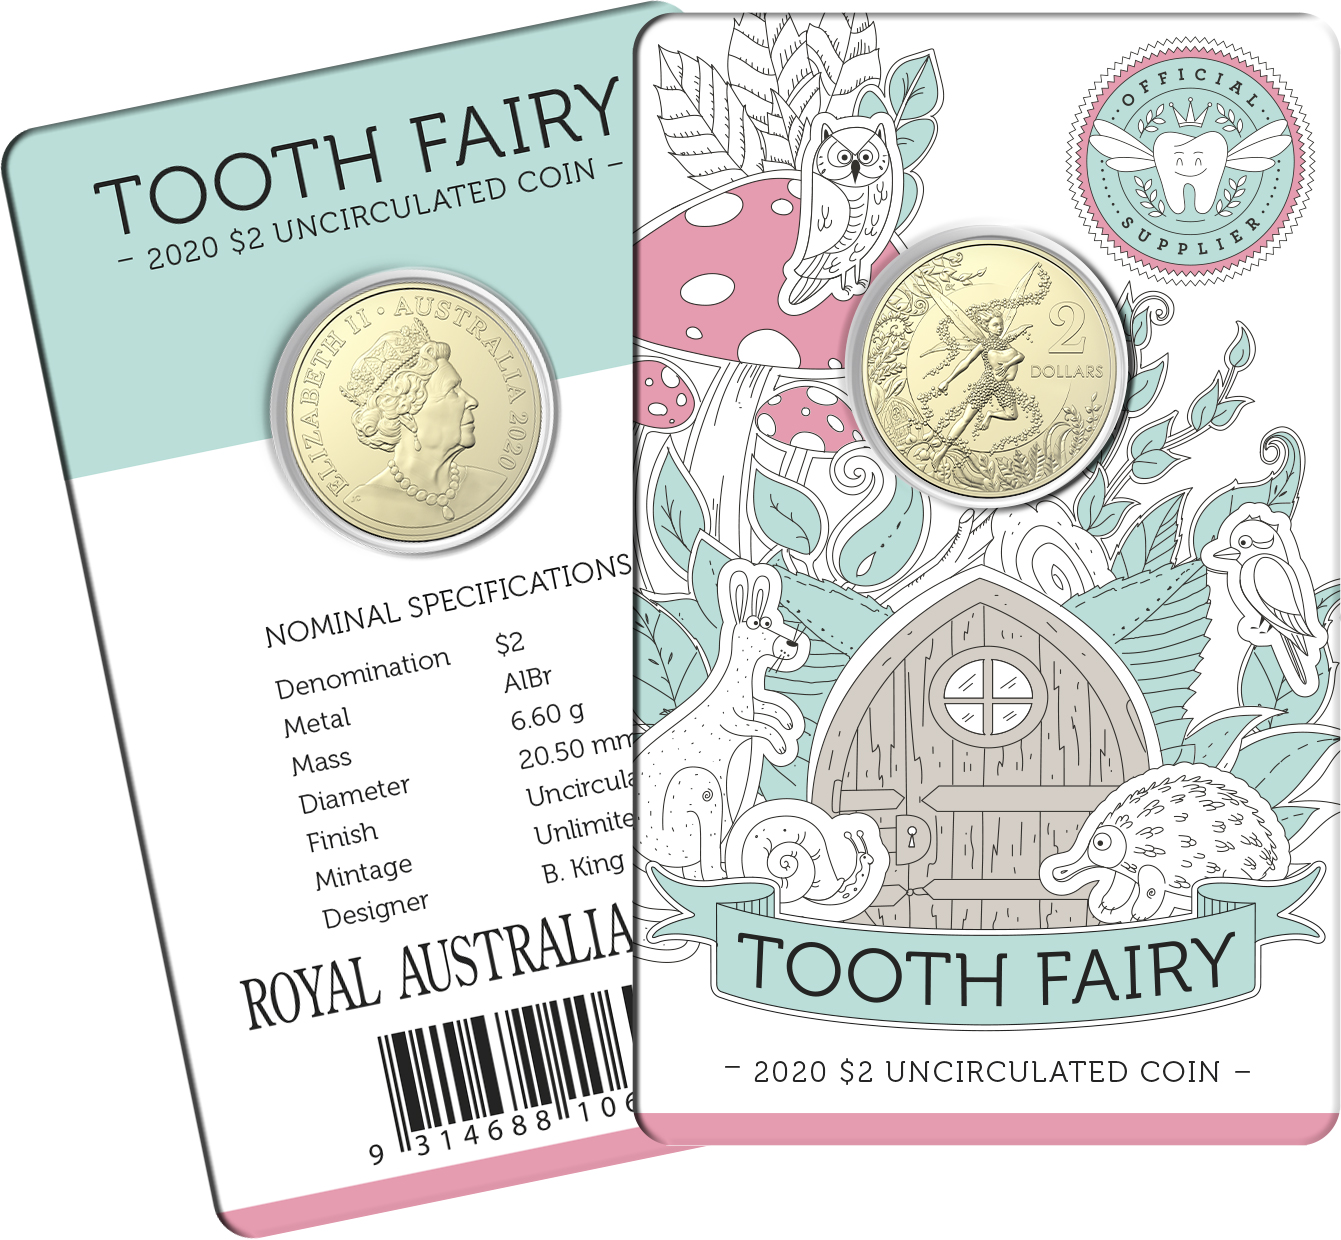 2020 $2 AlBr Uncirculated Tooth Fairy Coin in Card